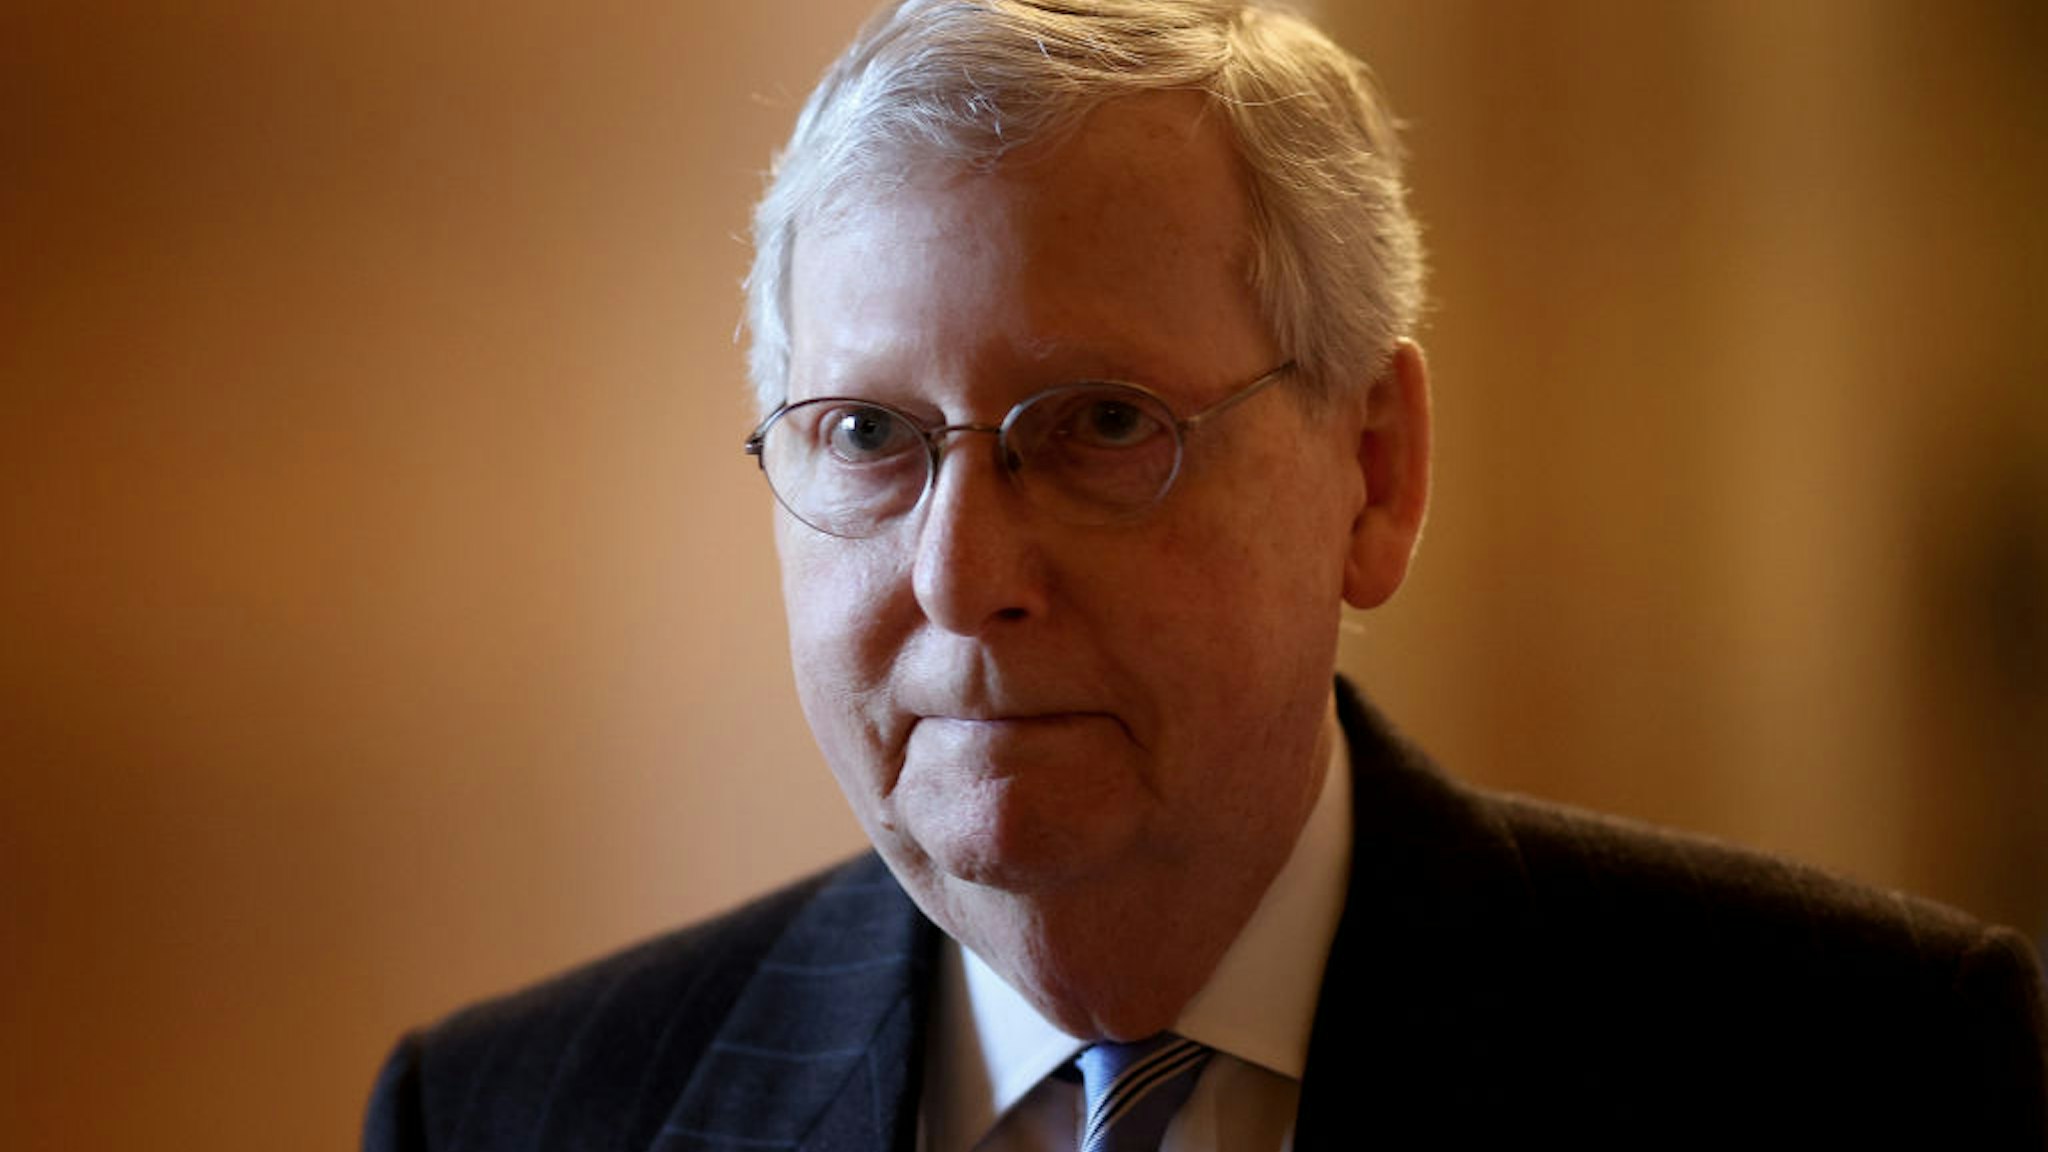 U.S. Senate Majority Leader Mitch McConnell (L) (R-KY) walks to his office while arriving at the U.S. Capitol on March 18, 2020 in Washington, DC.